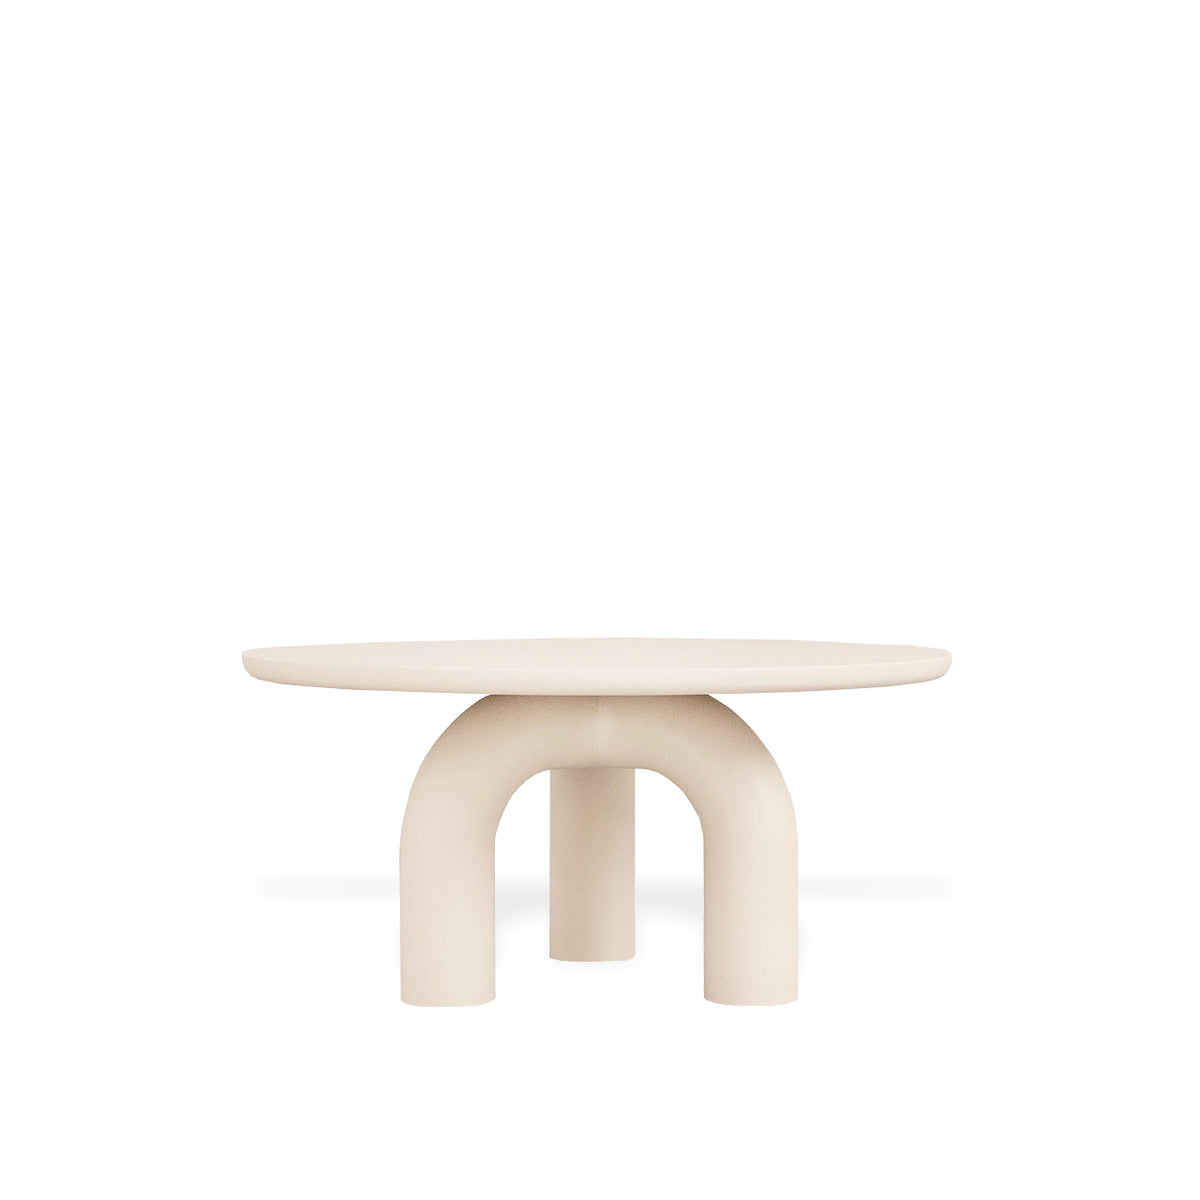 Elly Dining Table / 160 x 75 CM